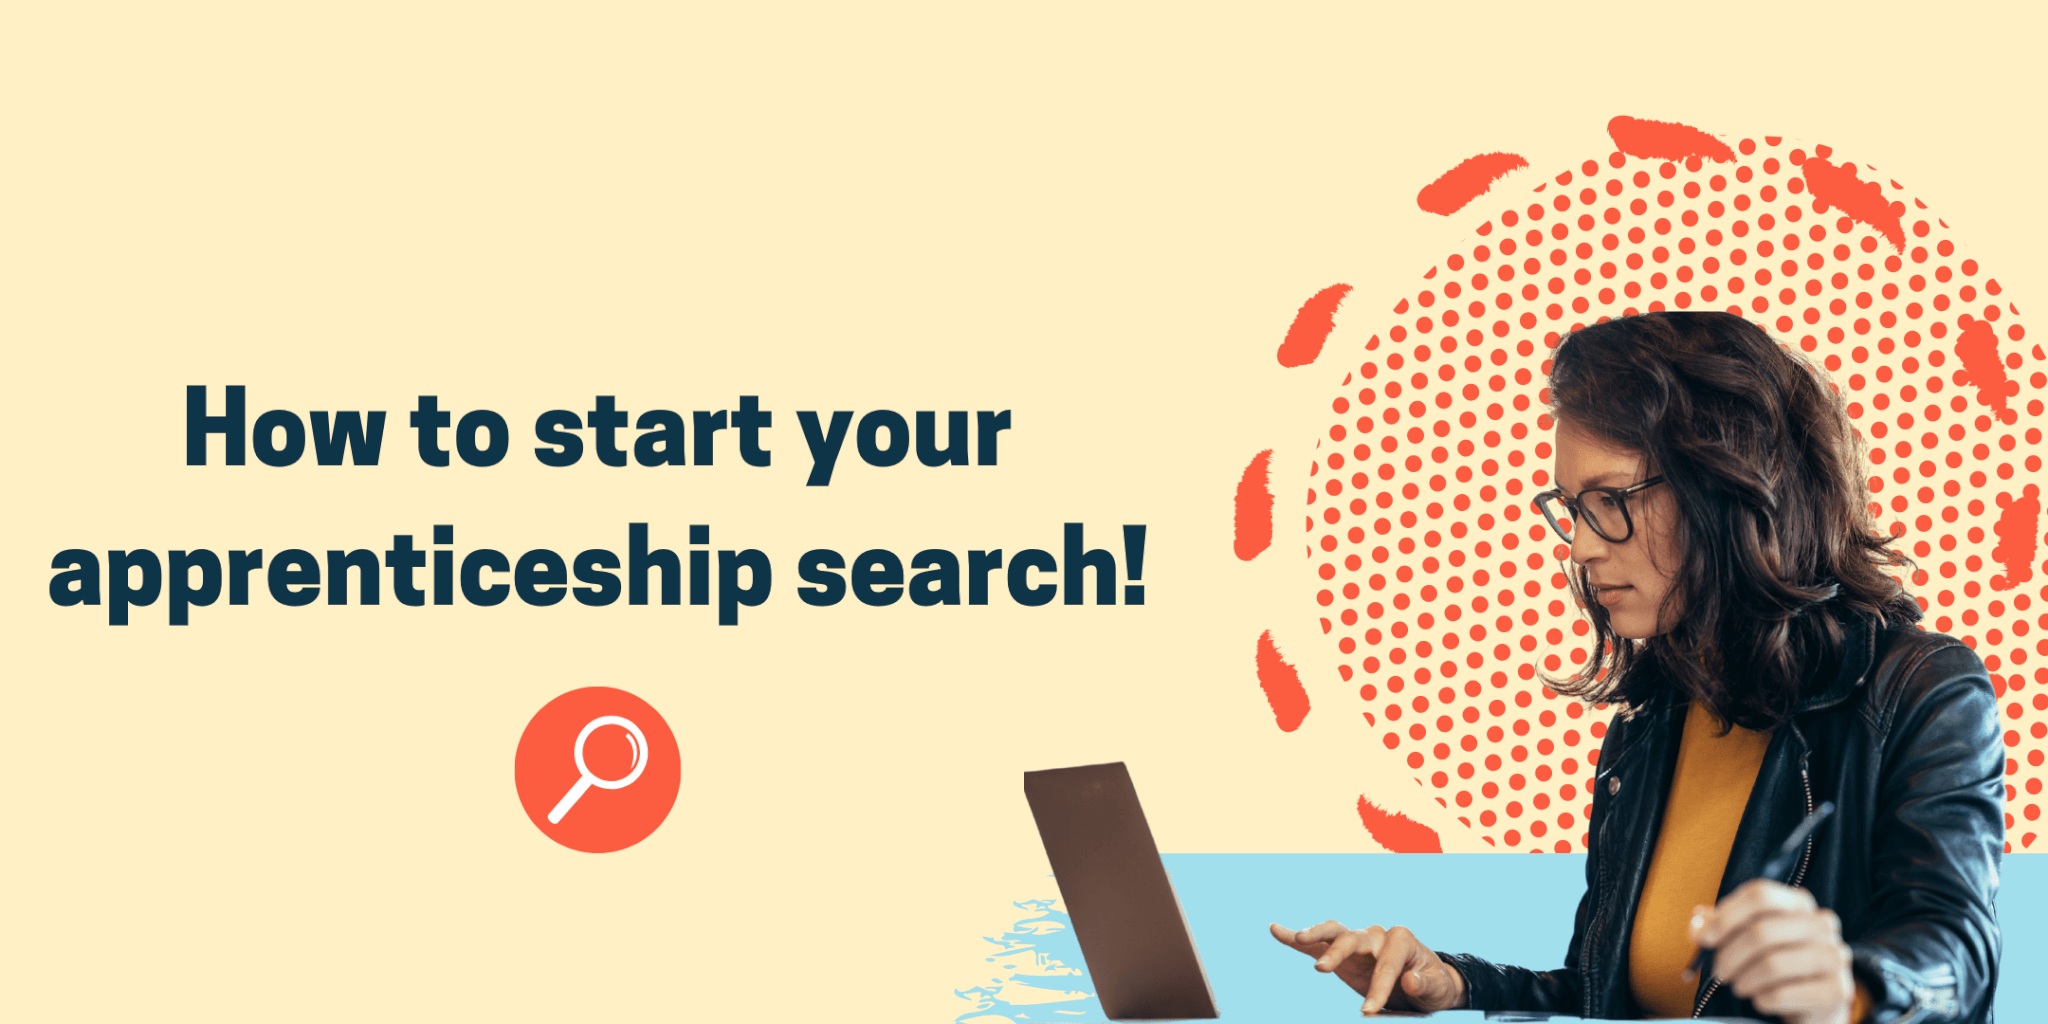 How to get started with your apprenticeship search!